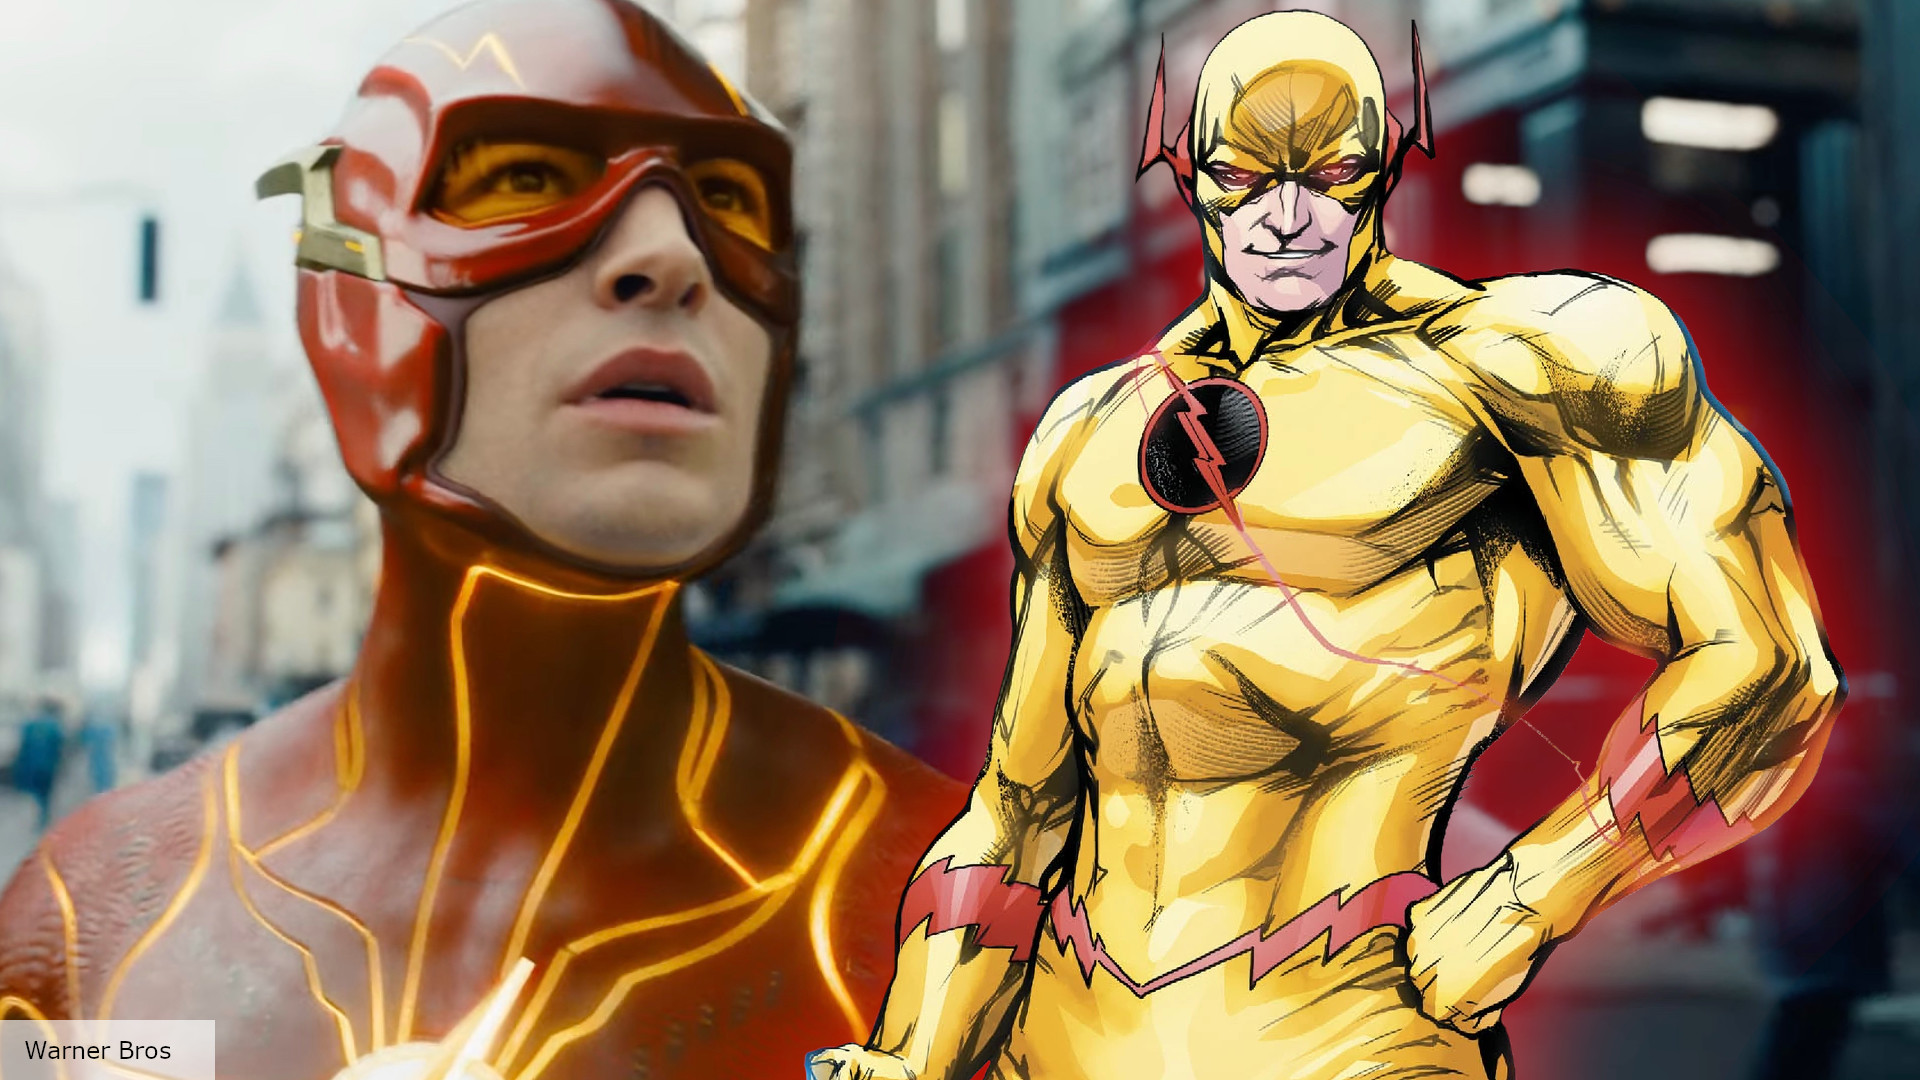 Is the Reverse Flash in The Flash?